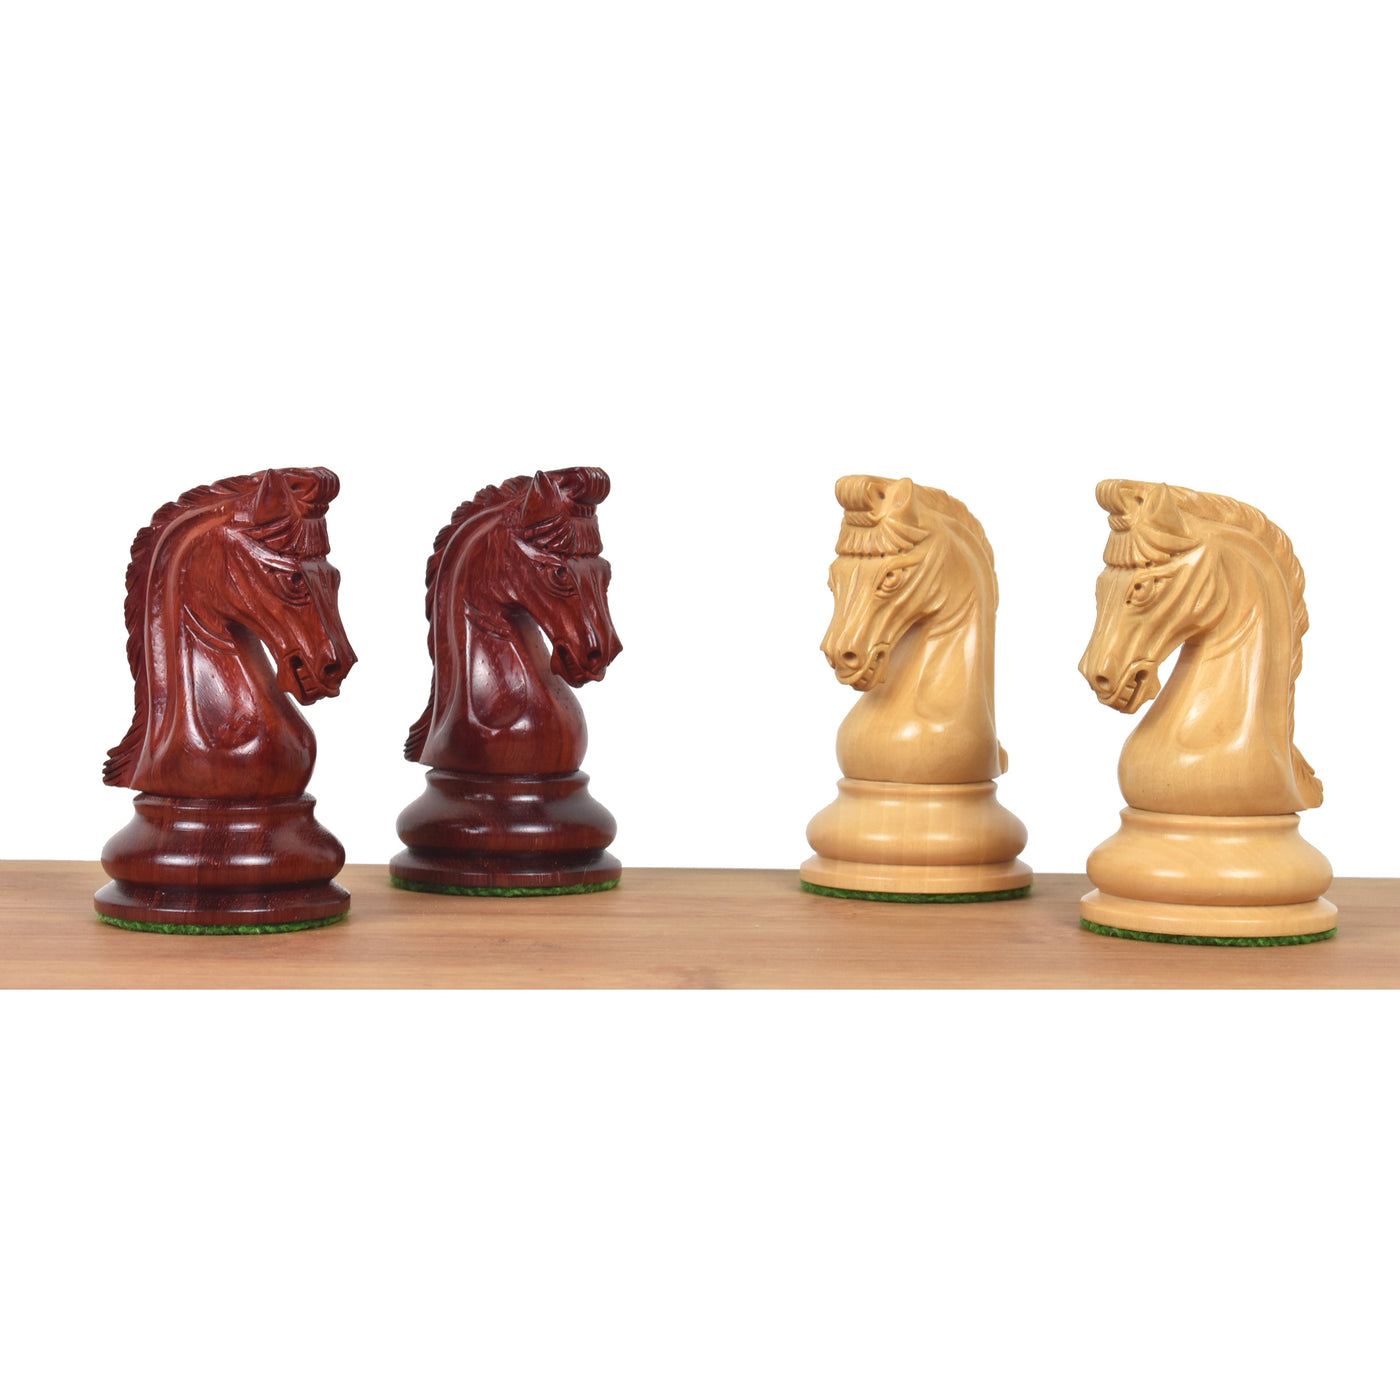 Slightly Imperfect Repro 2016 Sinquefield Staunton Chess Set - Chess Pieces Only-Bud Rosewood-Triple Weight